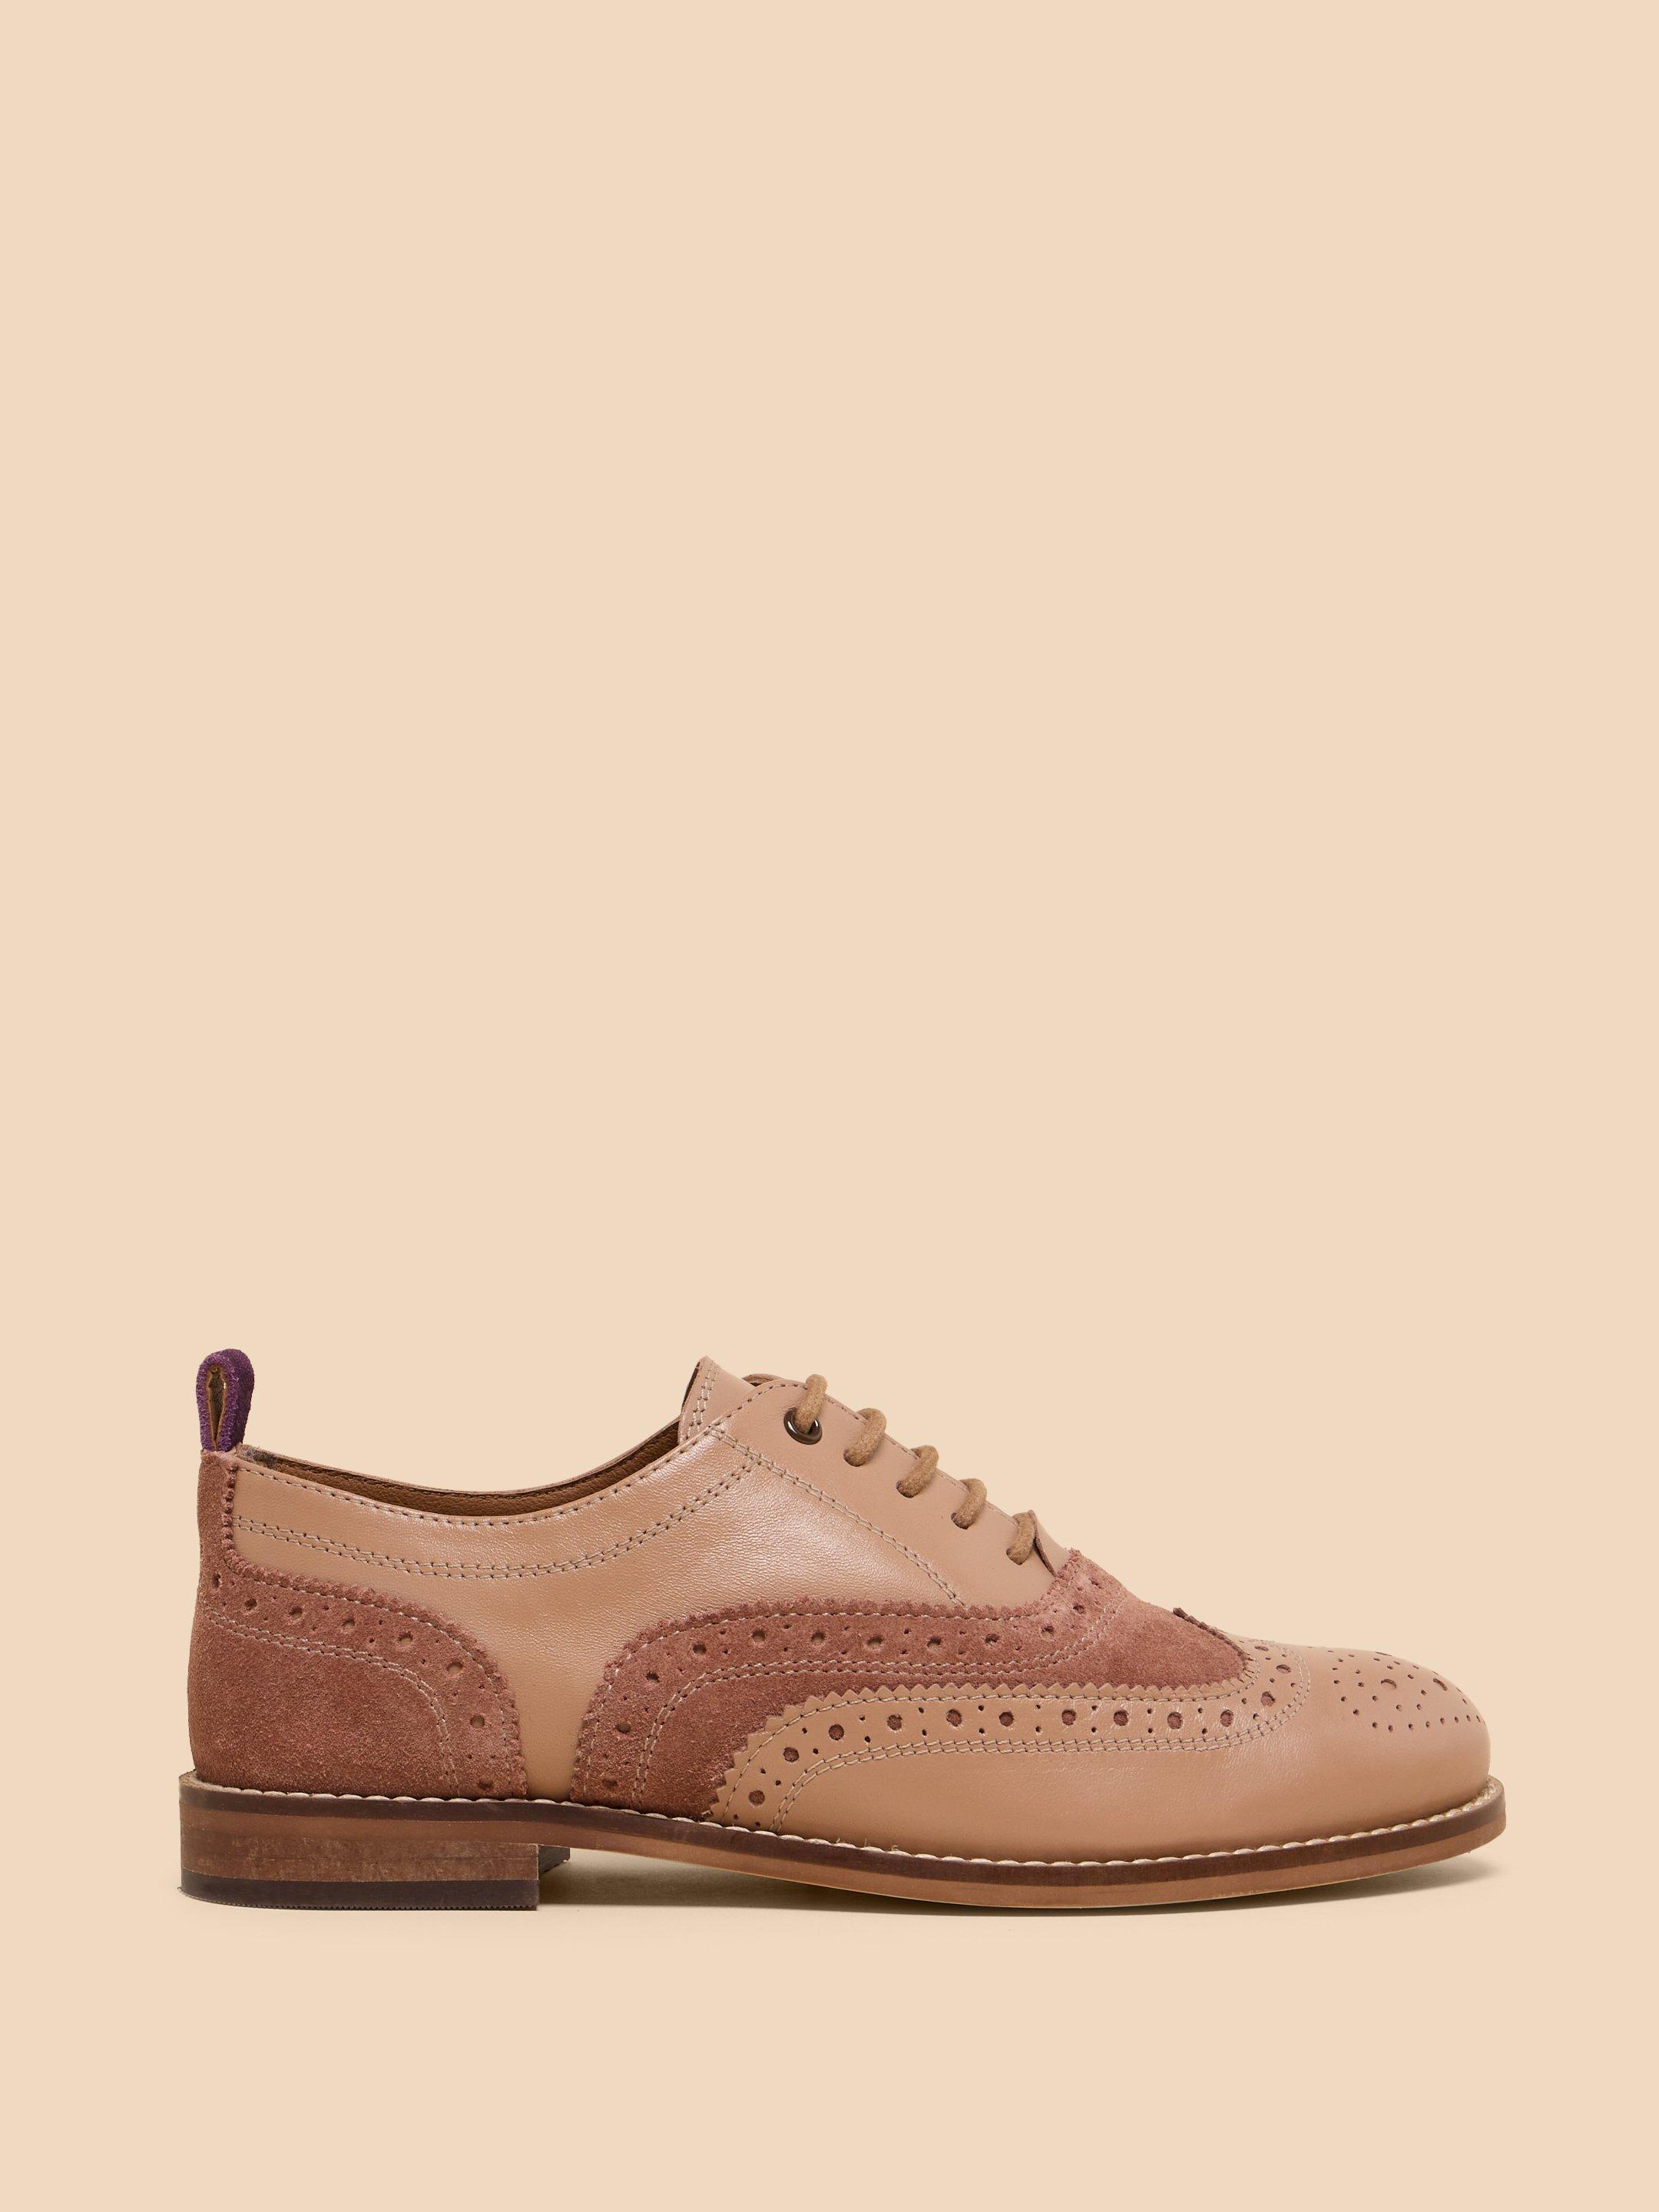 Thistle Lace Up Leather Brogue in MID PINK - LIFESTYLE